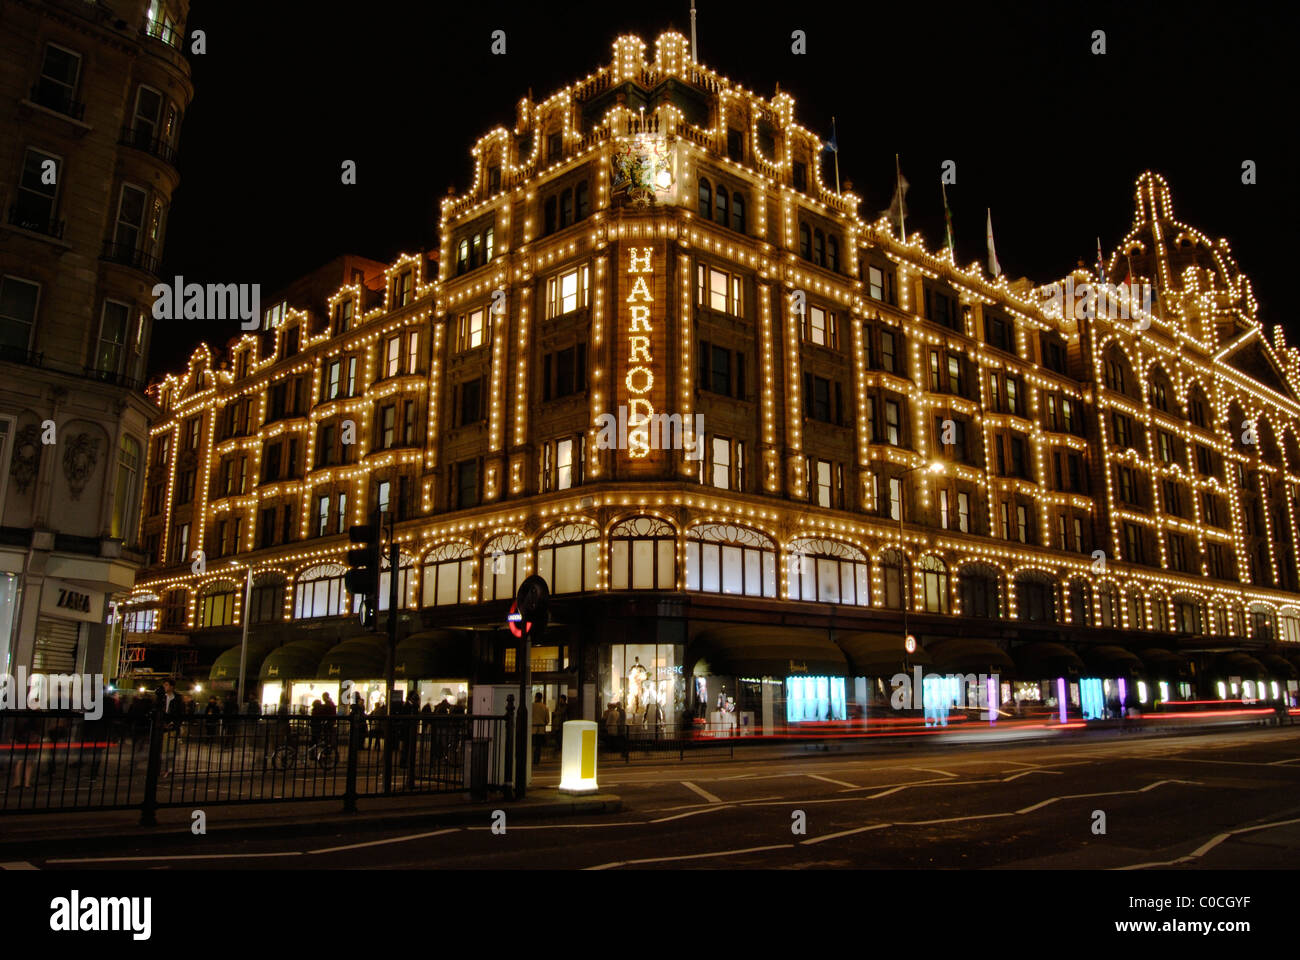 Harrods department store illuminated and the Brompton Road at night. London. England Stock Photo